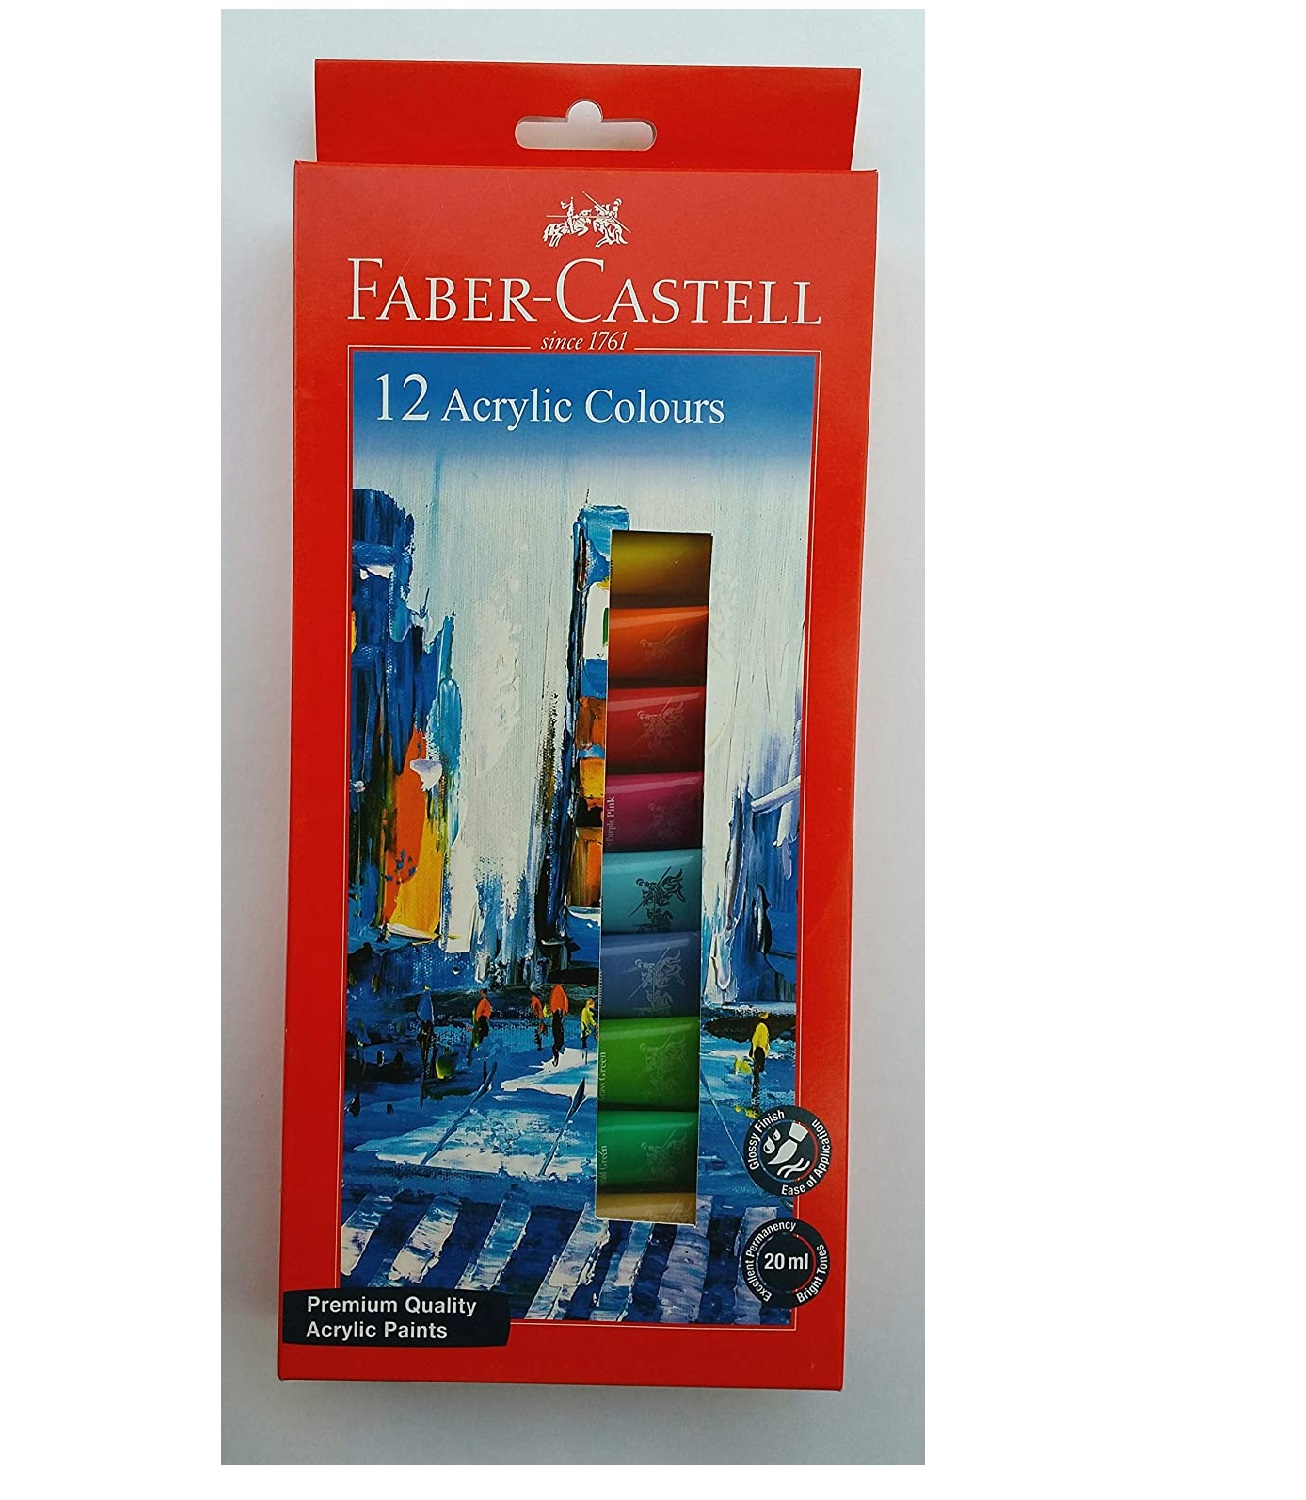 Faber-Castell Premium Acrylic 20ml Colour (Pack of 12)